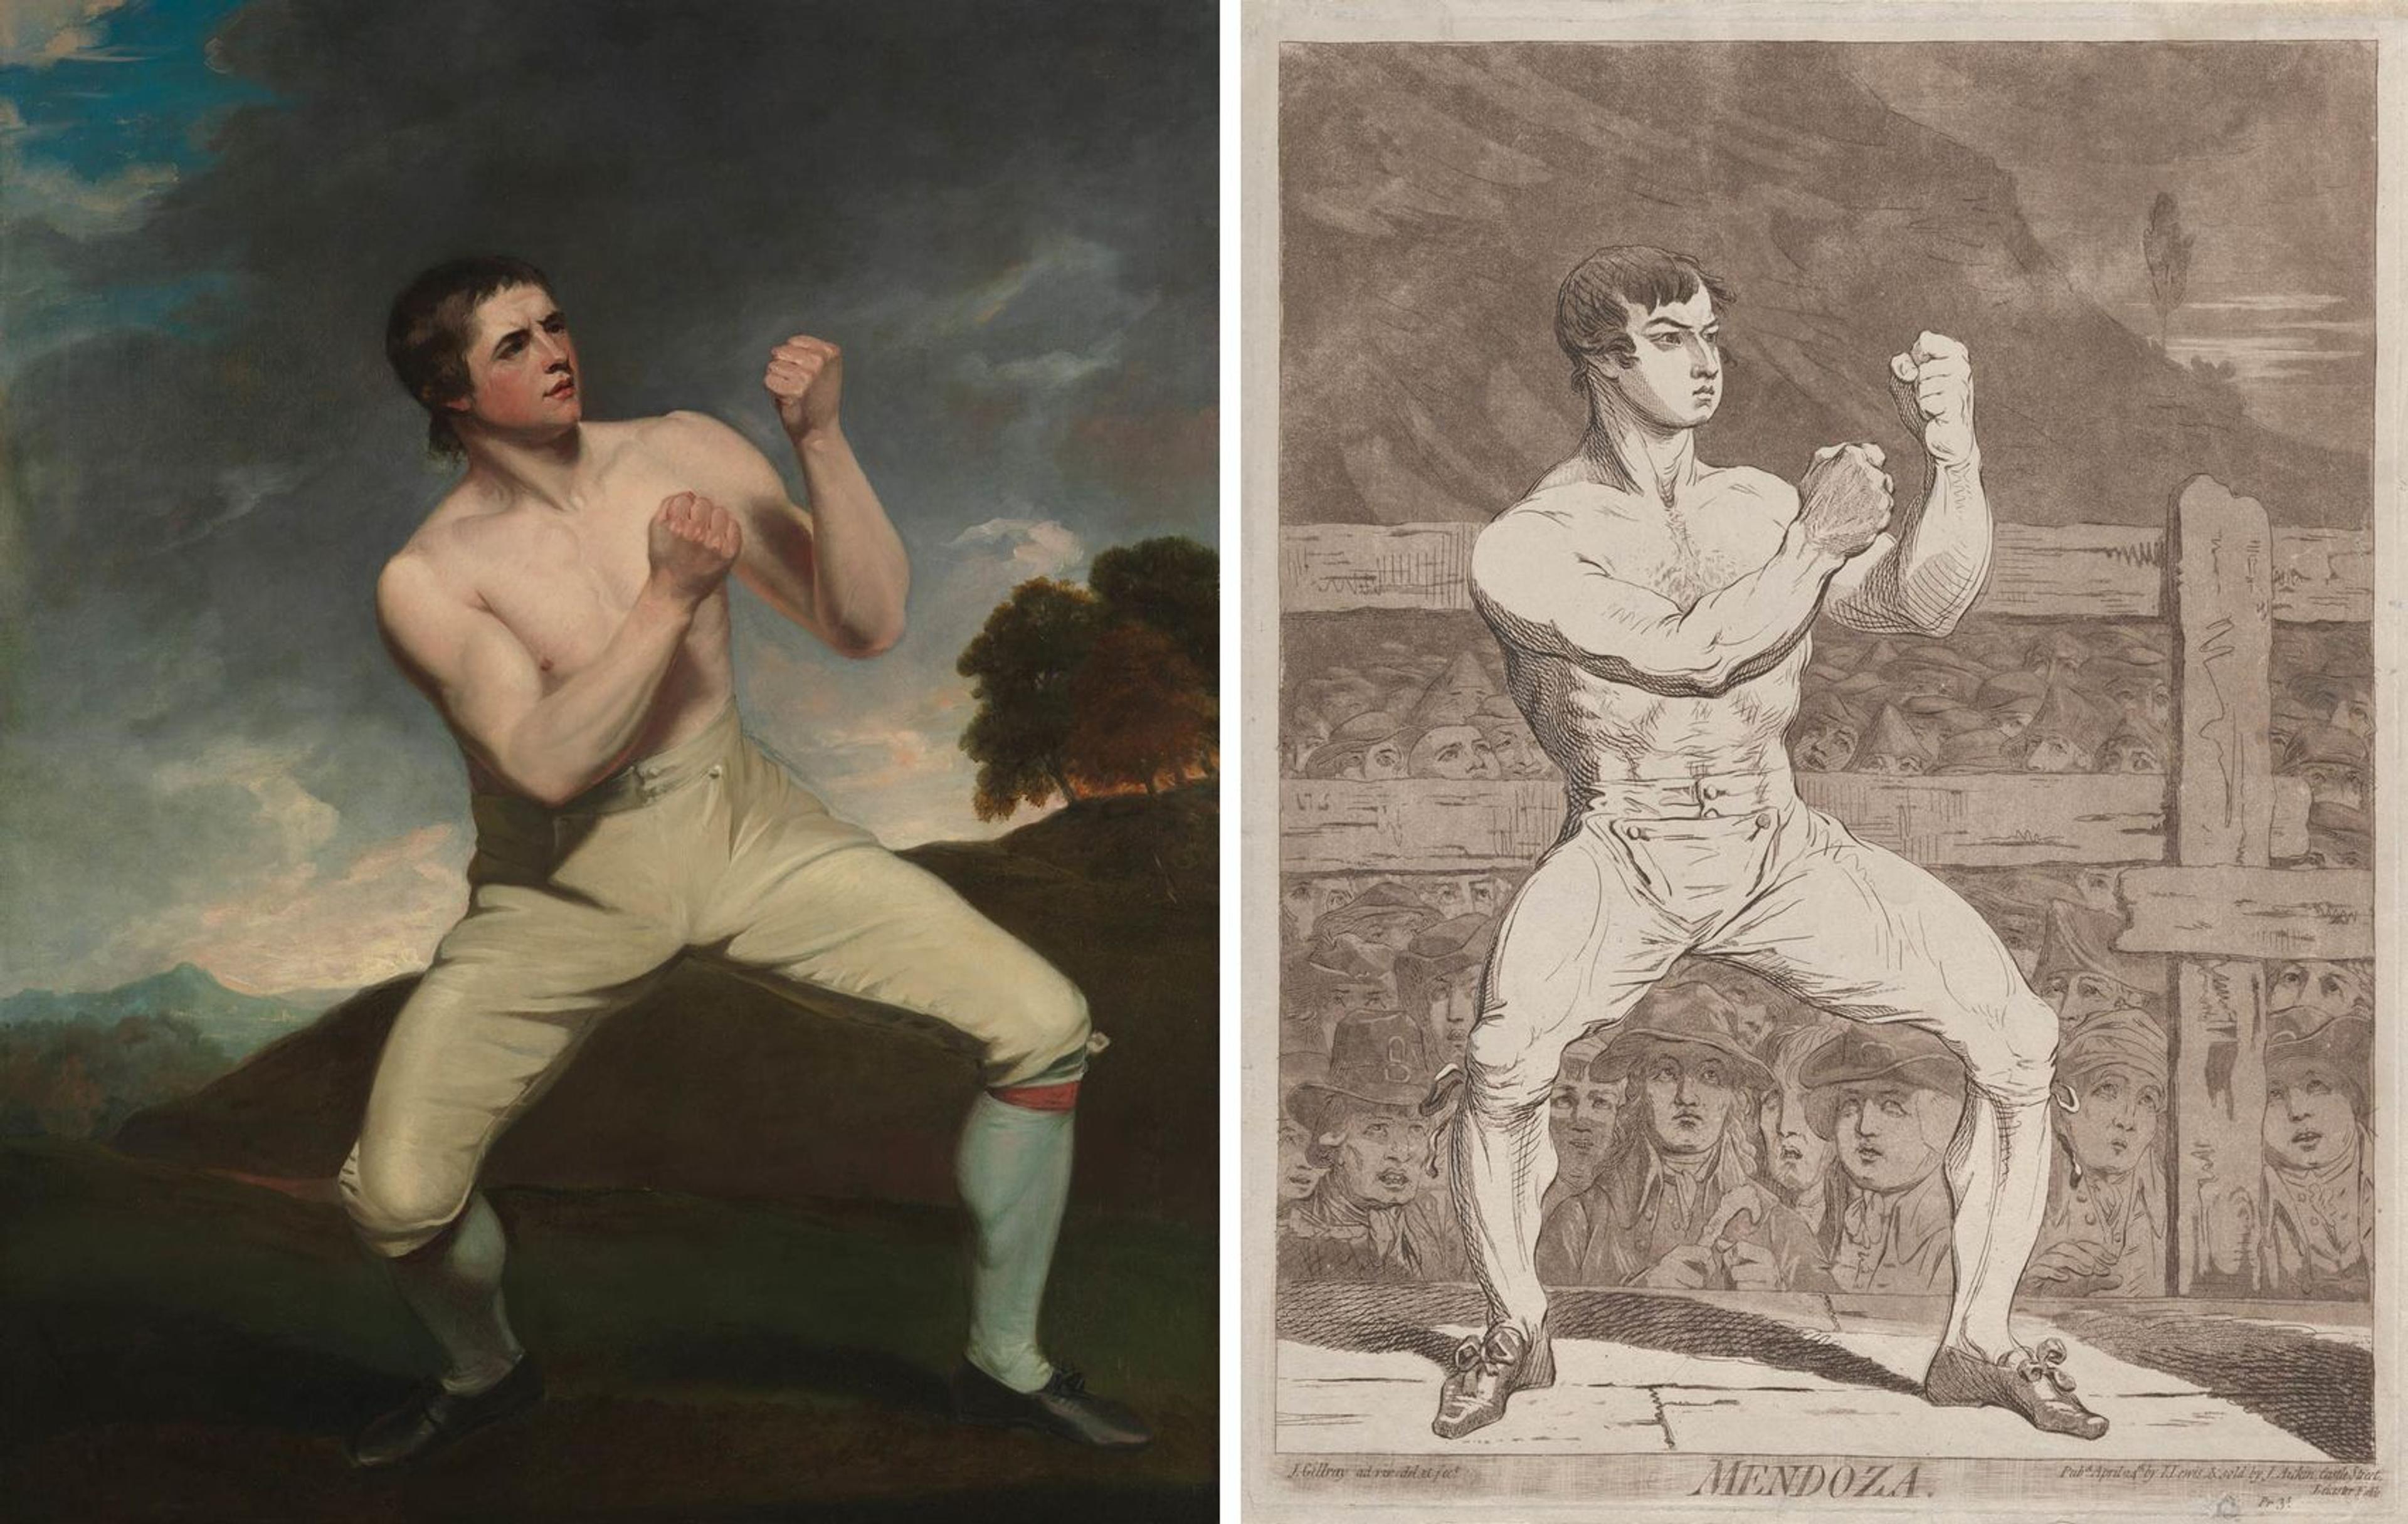 At left an undated painting by John Hoppner depicting a boxer in sparring position; at right, a 1788 etching/aquatint by James Gillray depicting a boxer in the same position